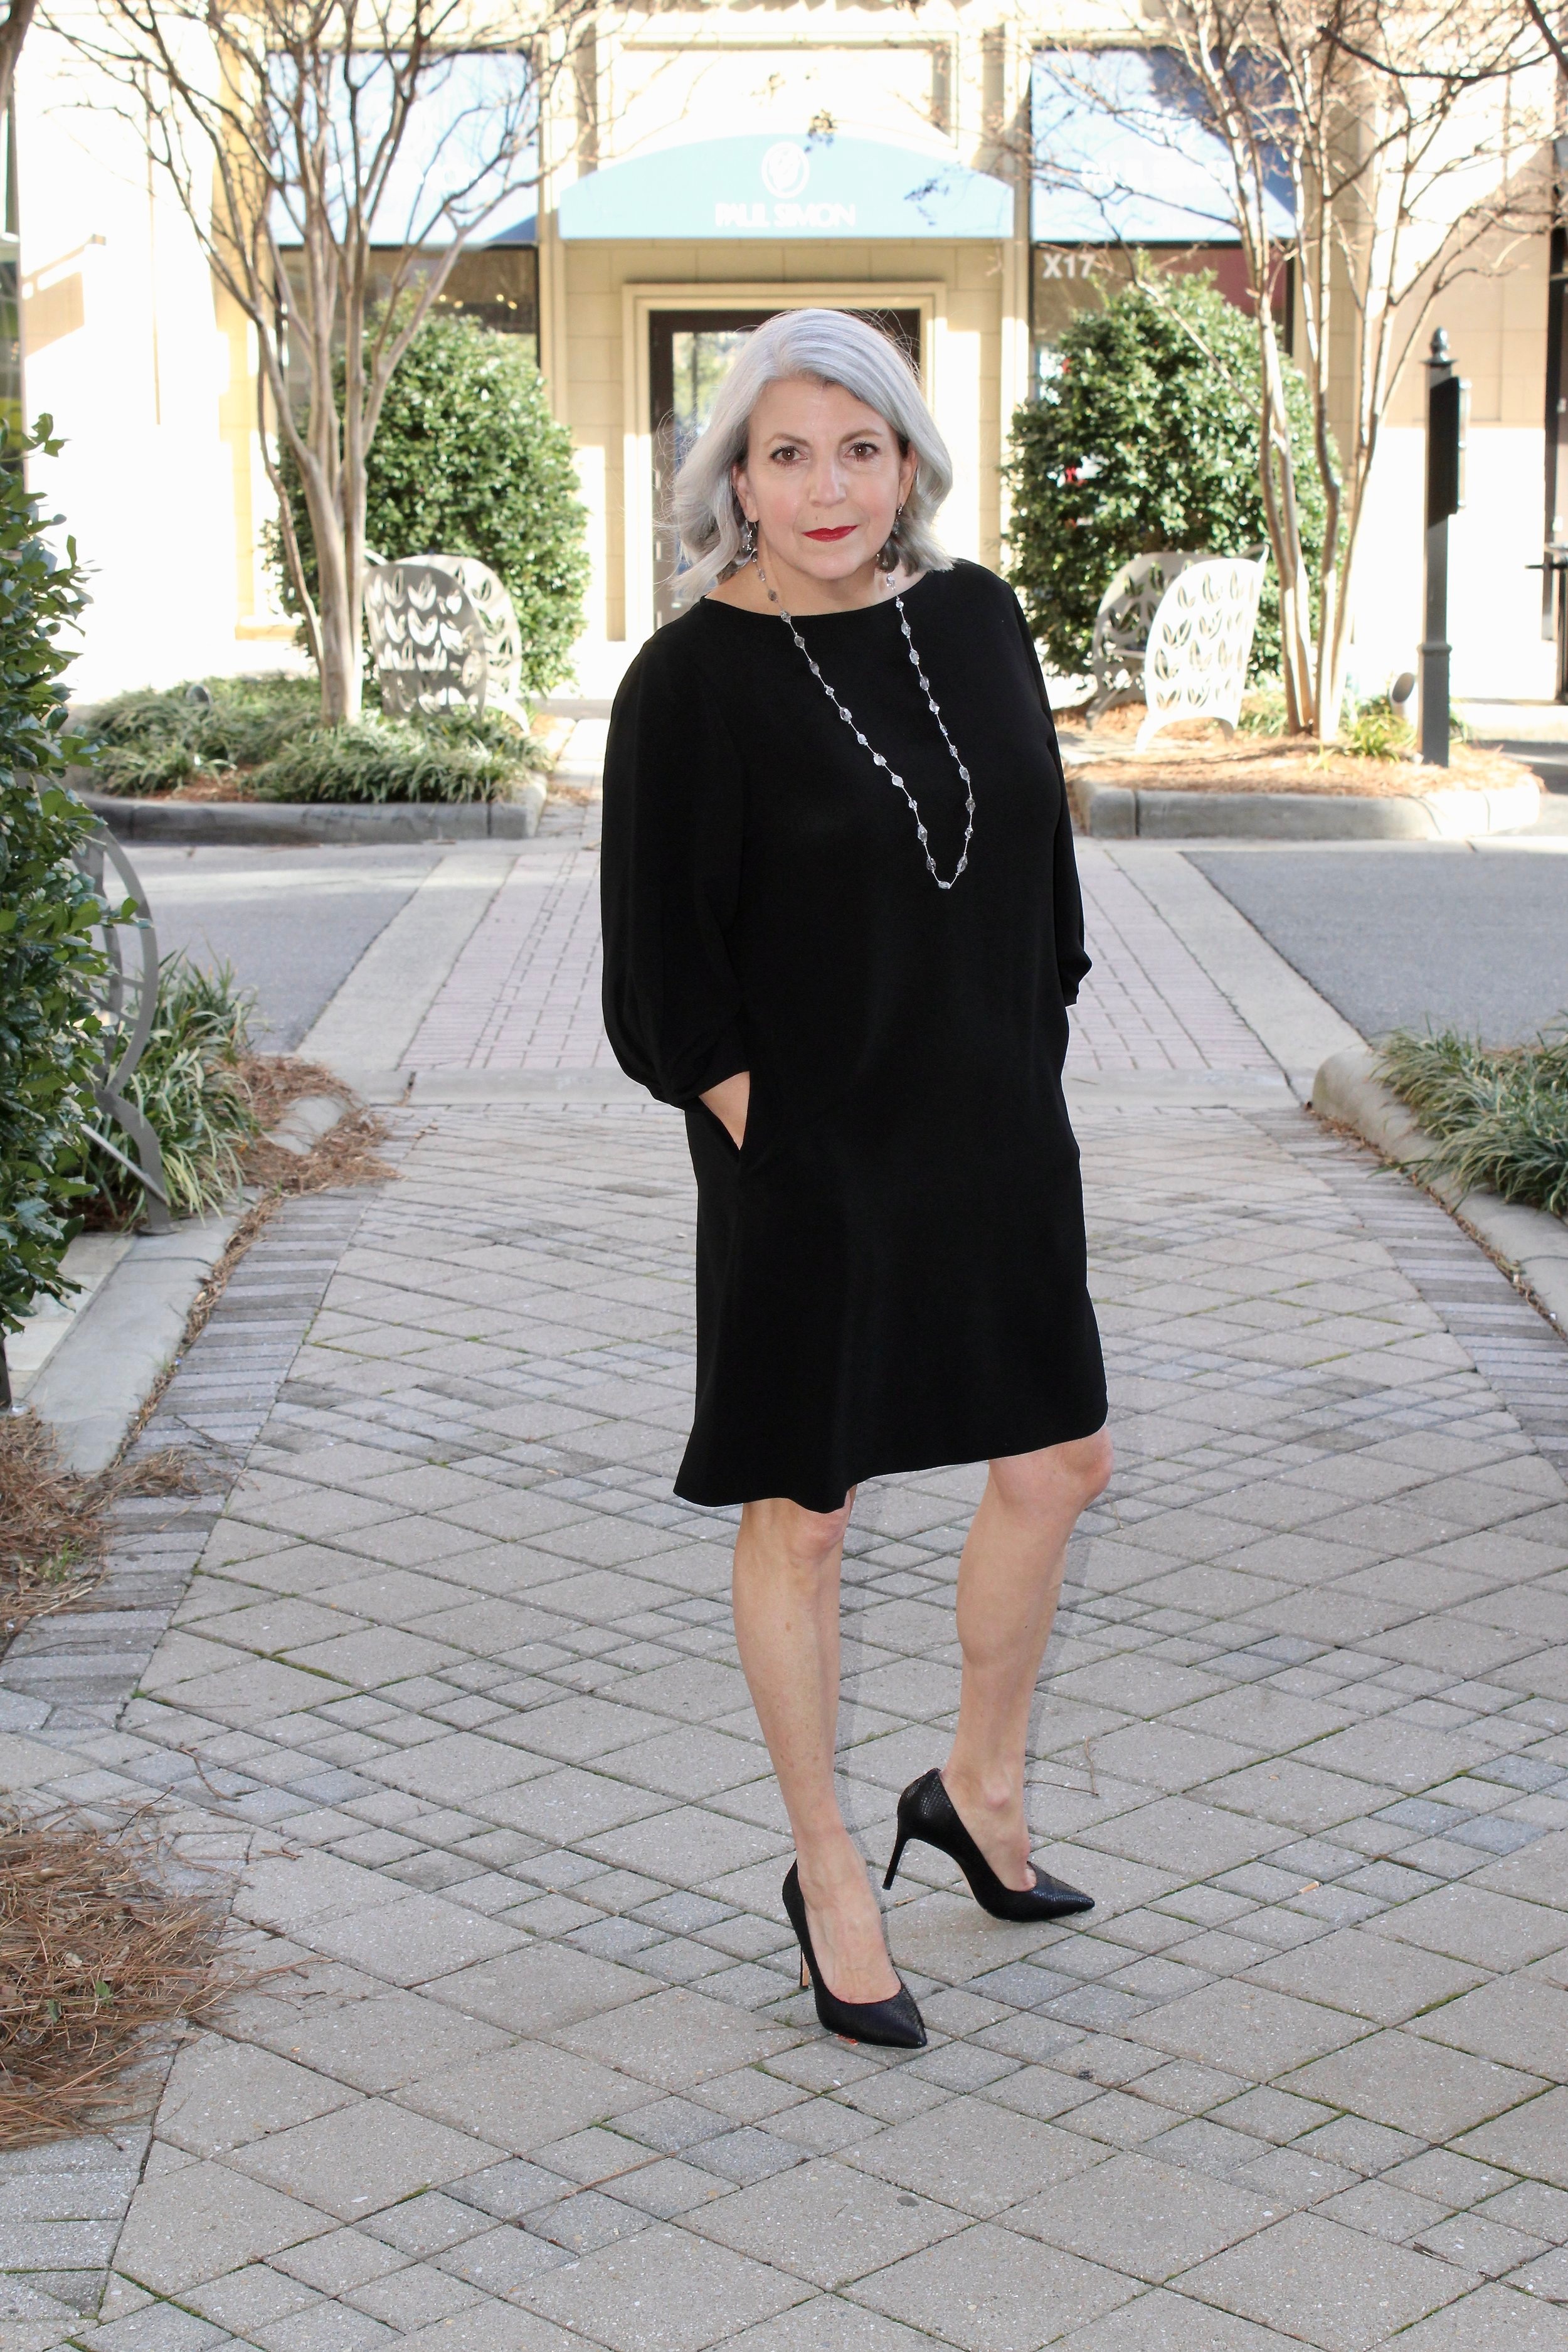 LBD For a Holiday Party | Style, Fashion, Dress party night